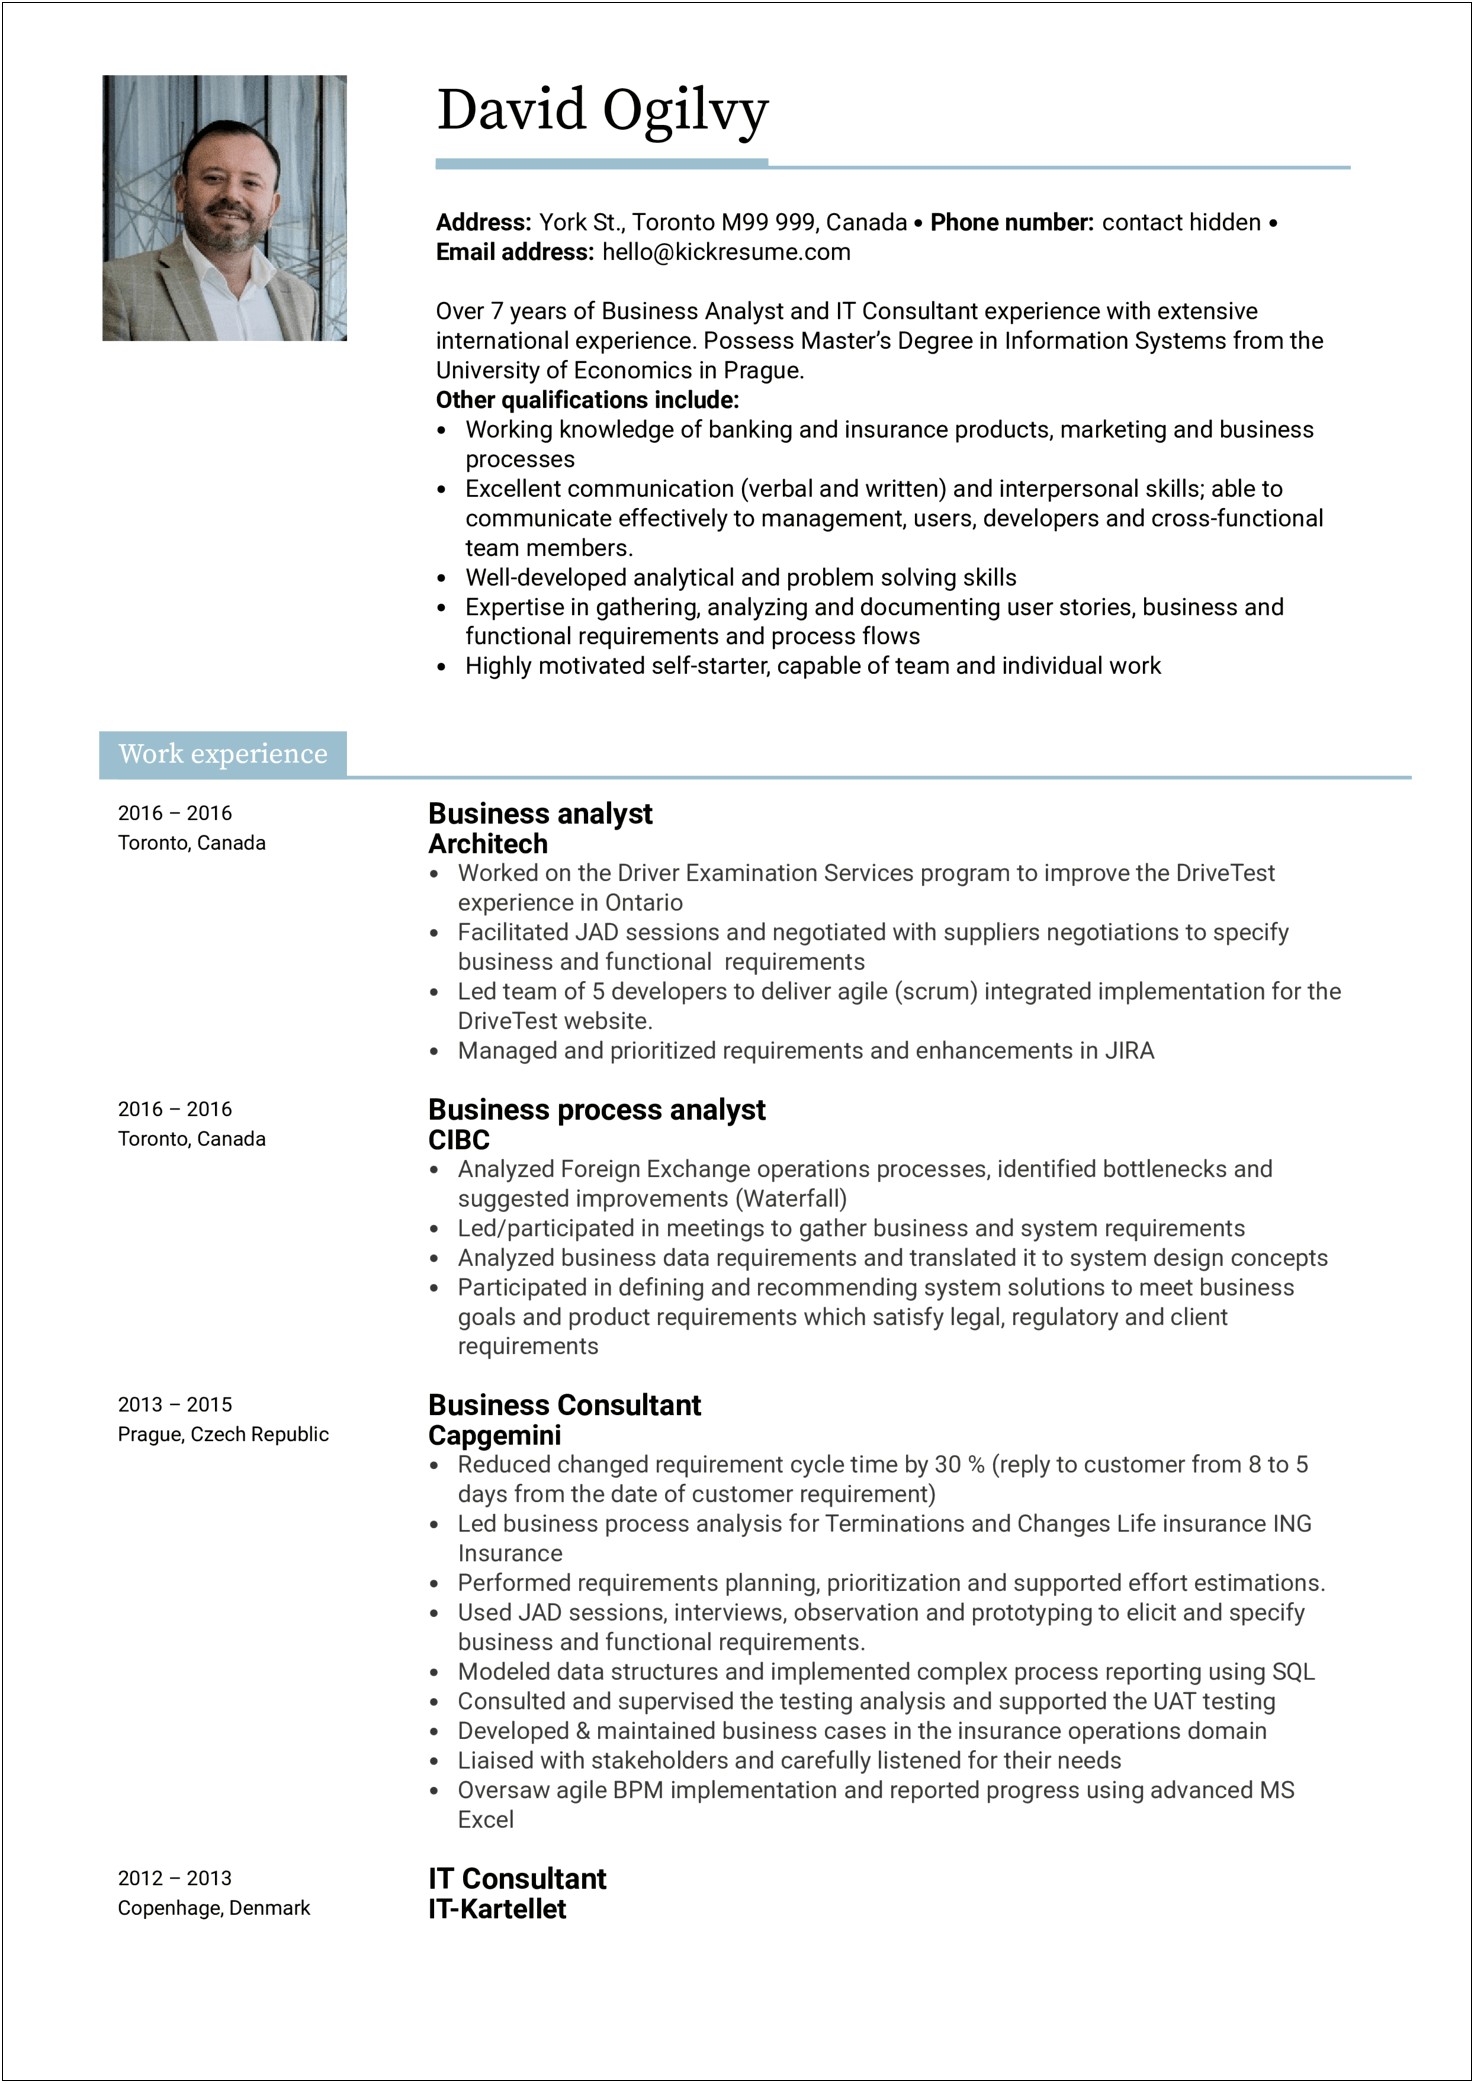 Sample Resume For Business Analyst In Banking Domain